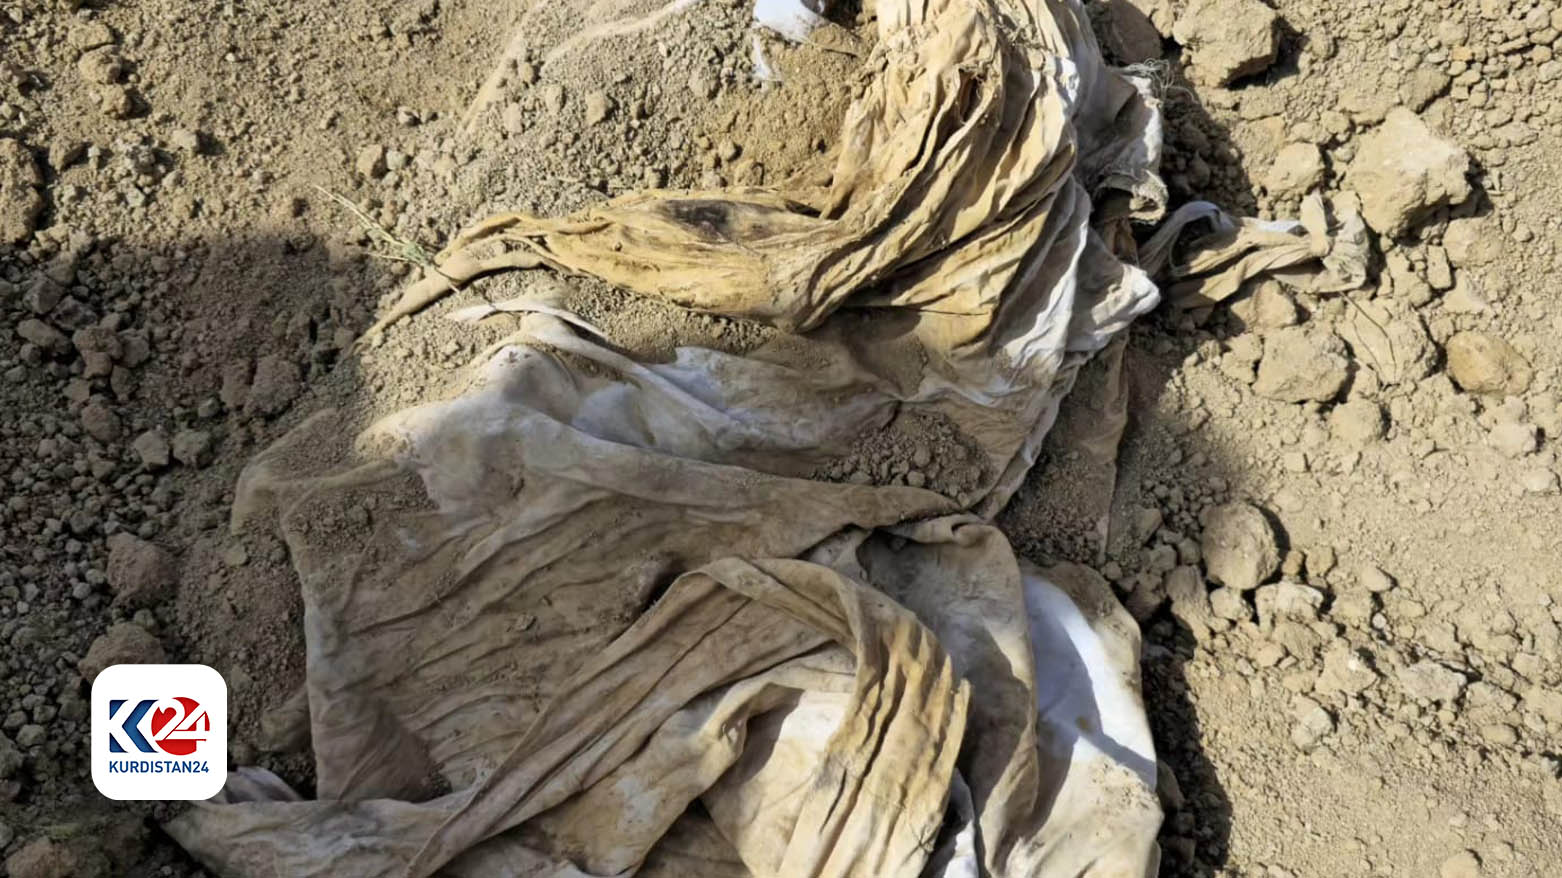 Remains of a victim in the mass grave discovered in Sinjar, April 19, 2024. (Photo: Kurdistan 24 via PETRICHOR)